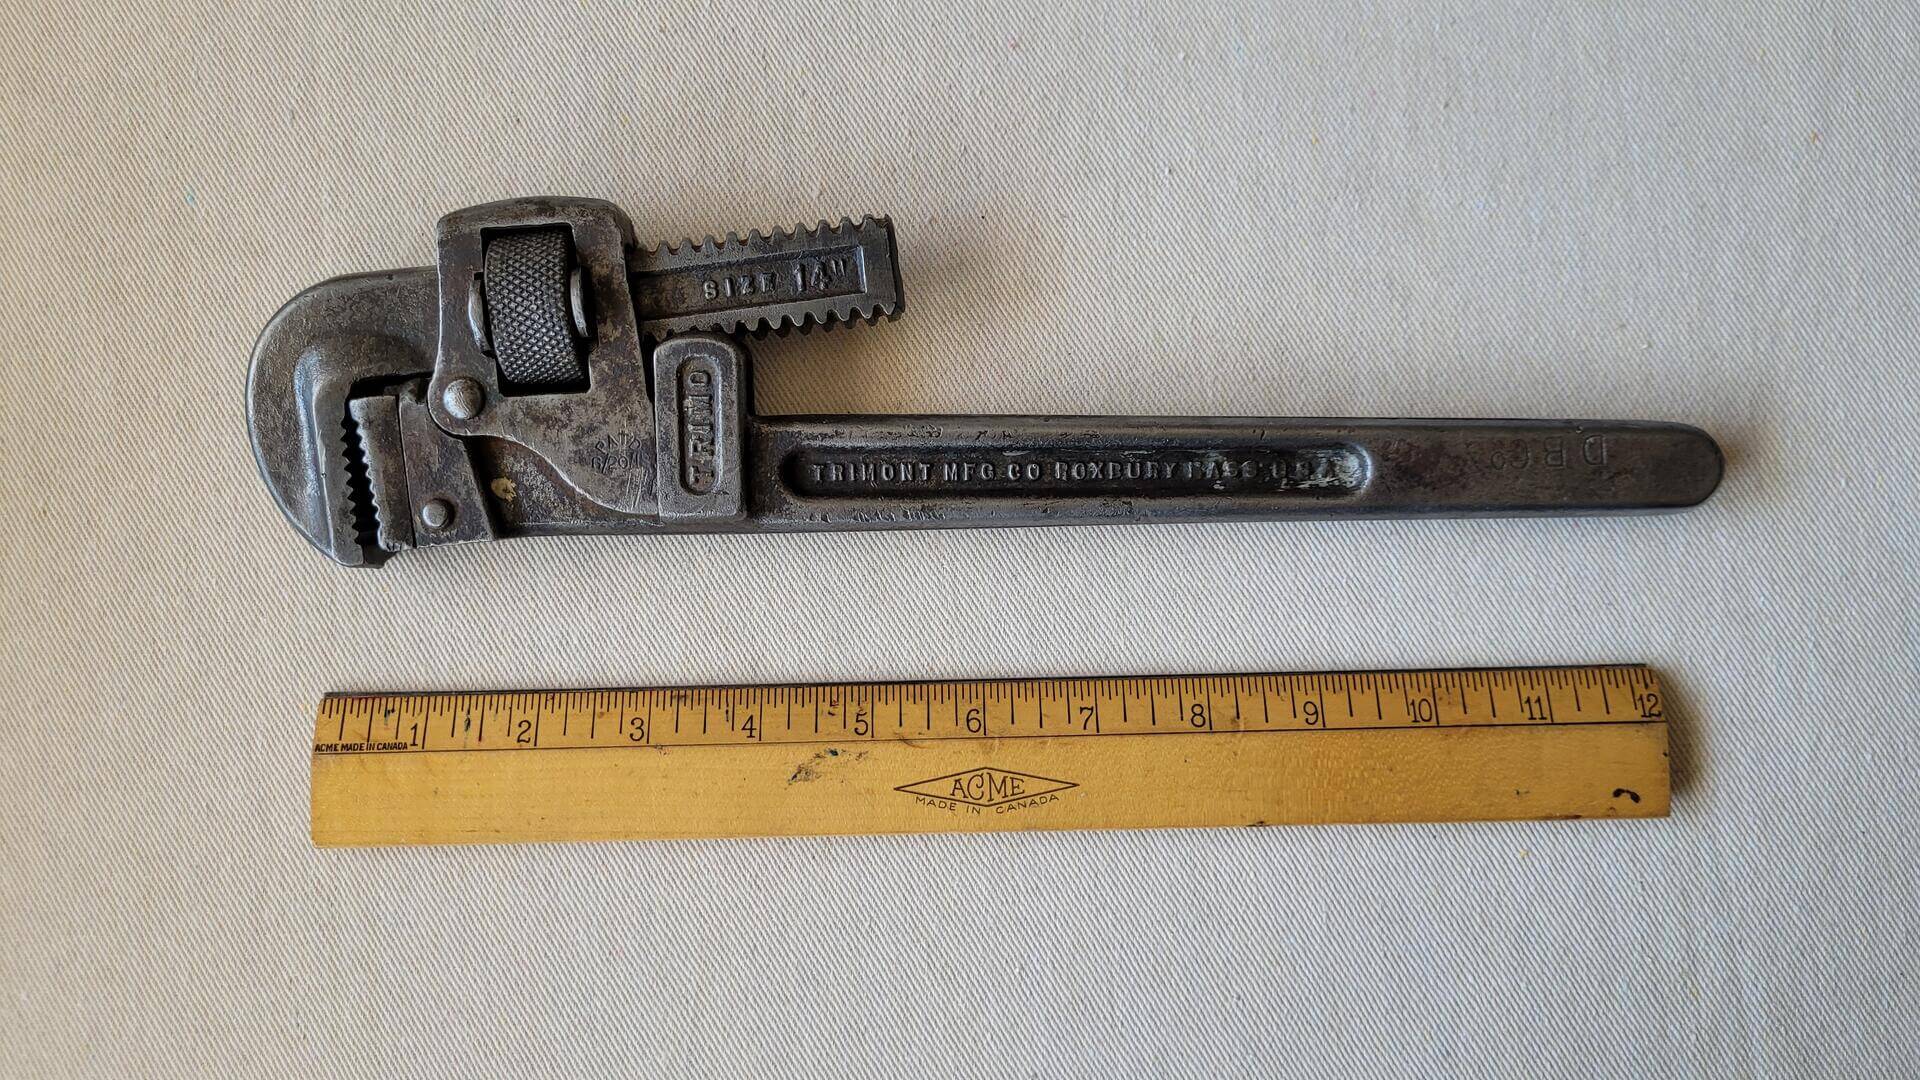 Vintage Trimo Stillson-pattern 14" adjustable pipe wrench by Trimont Mfg Co from Roxbury Mass. Antique made in USA collectible machinist and plumbing tools